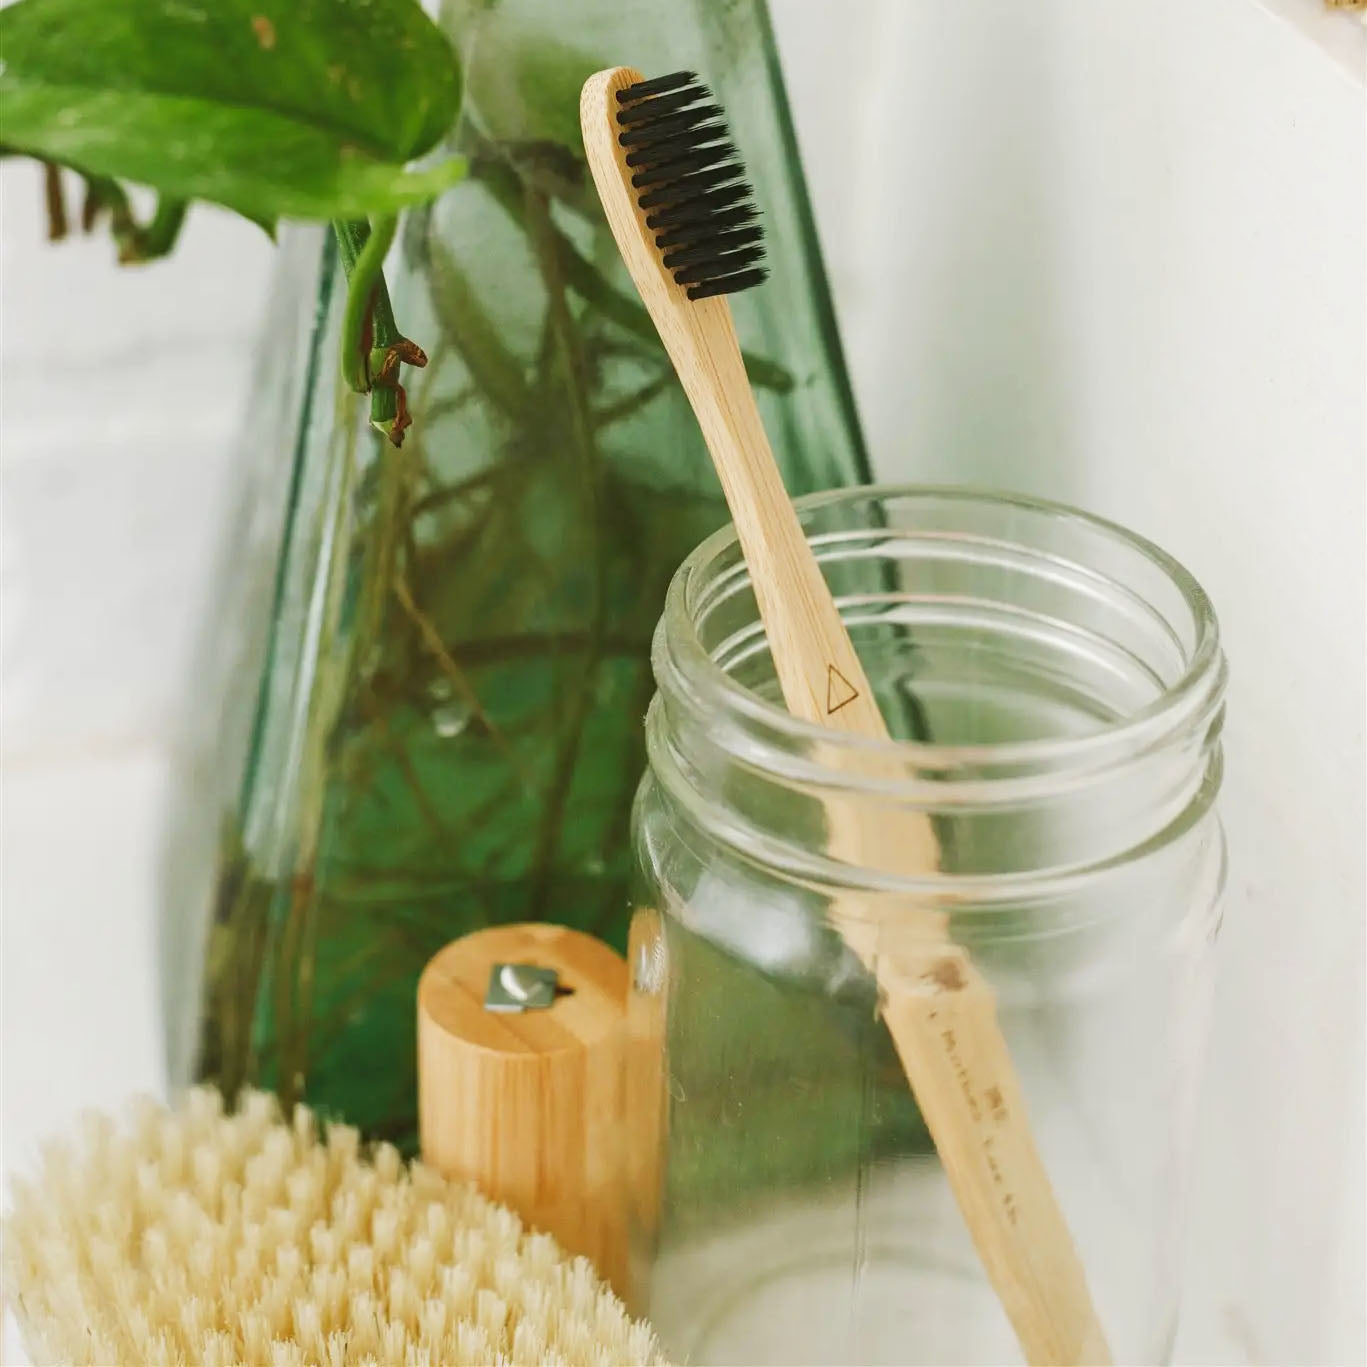 Bamboo Charcoal toothbrush - geometric markings for distinguishing users - sustainable toothbrush in glass jar with plant